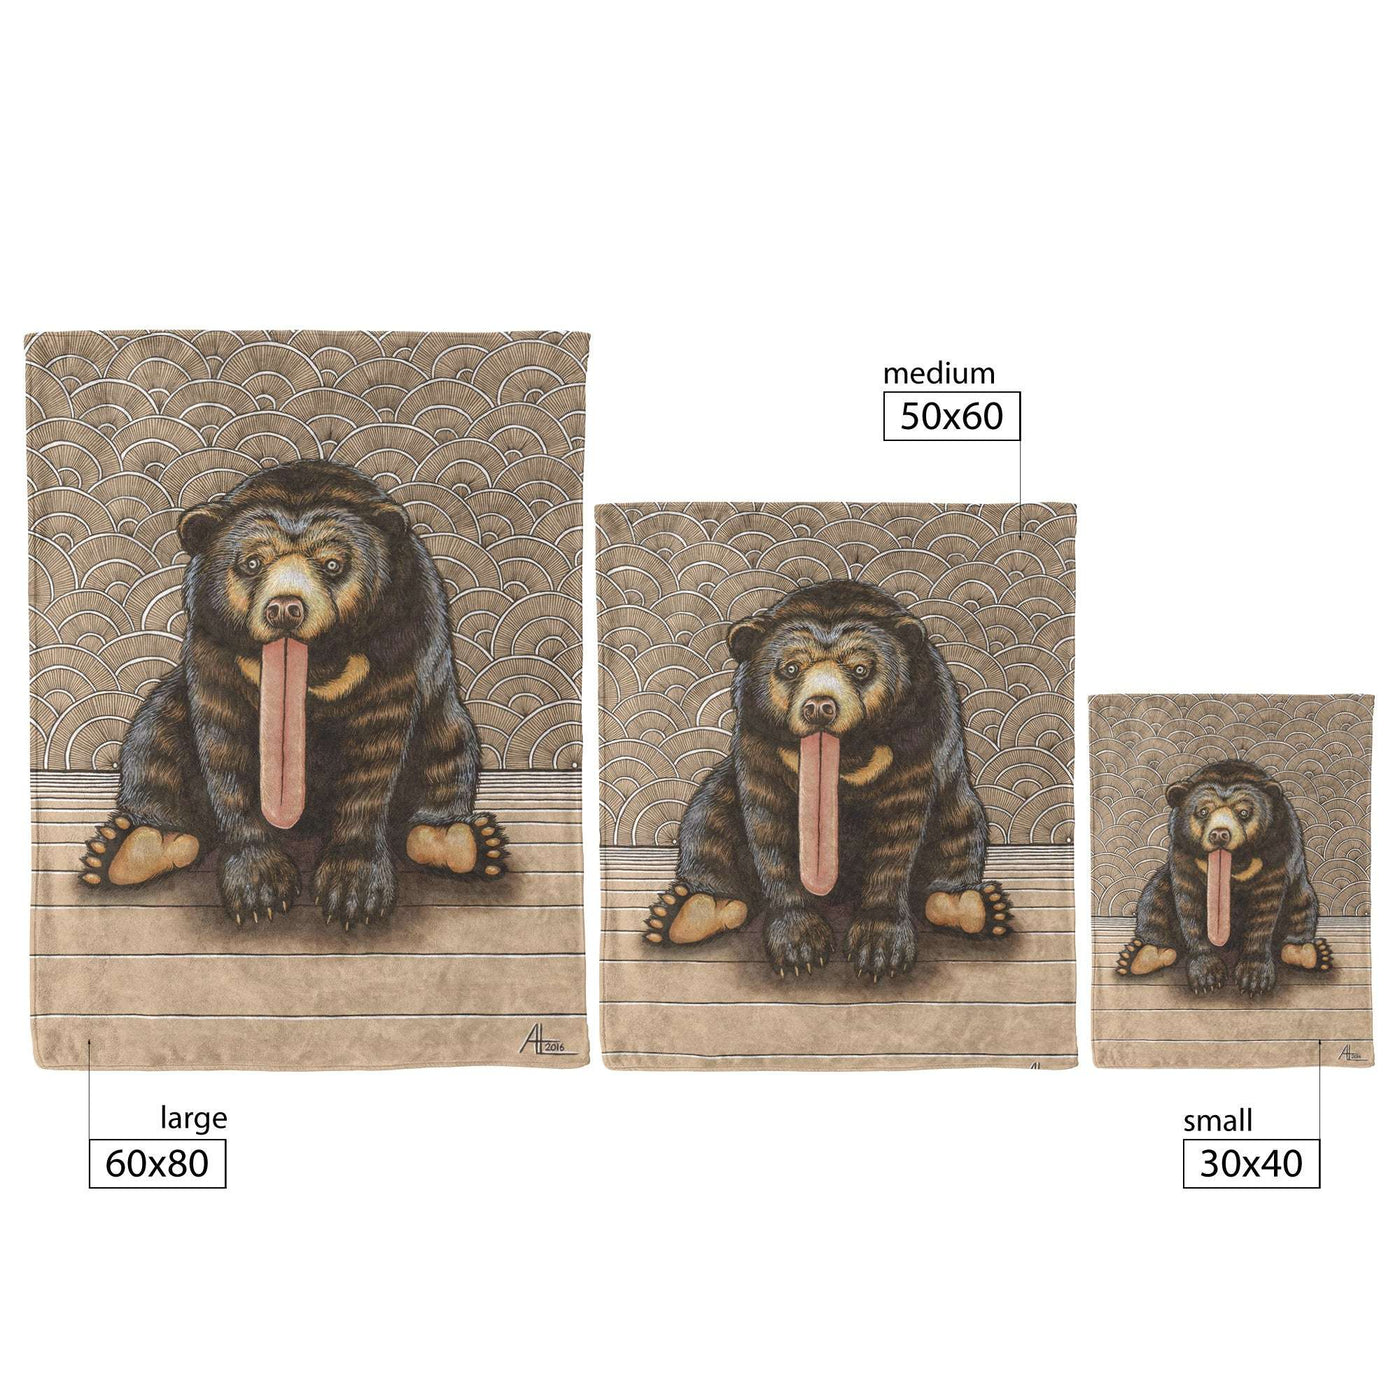 Three Sun Bear Blankets featuring a cartoon bear with a long tongue, presented in different sizes: large (60x80), medium (50x60), and small (30x40).